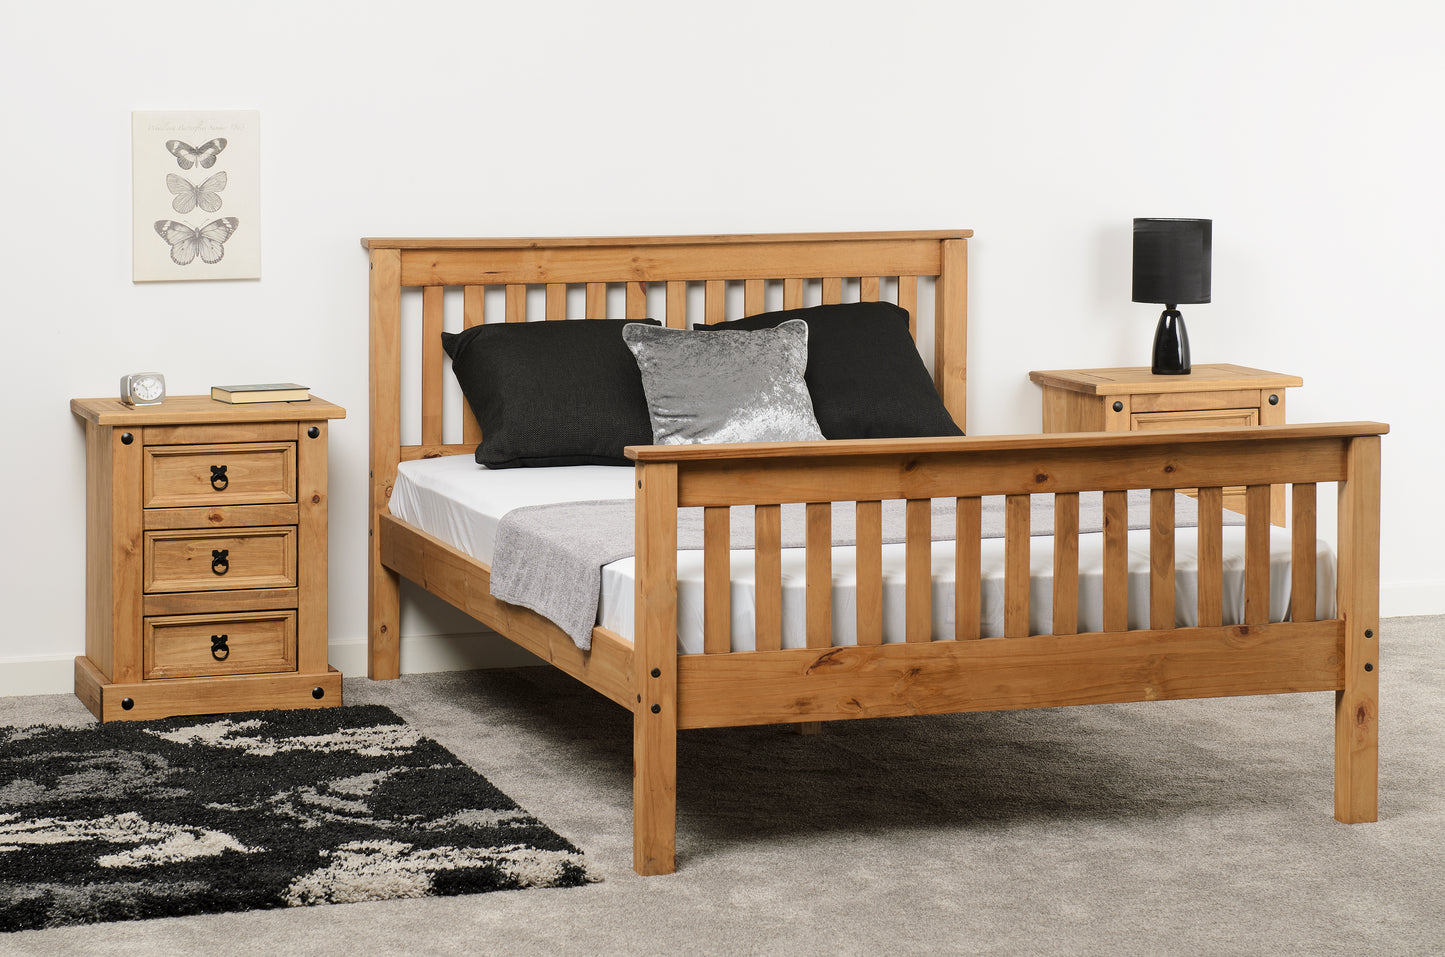 MONACO 4'6" BED HIGH FOOT END - DISTRESSED WAXED PINE